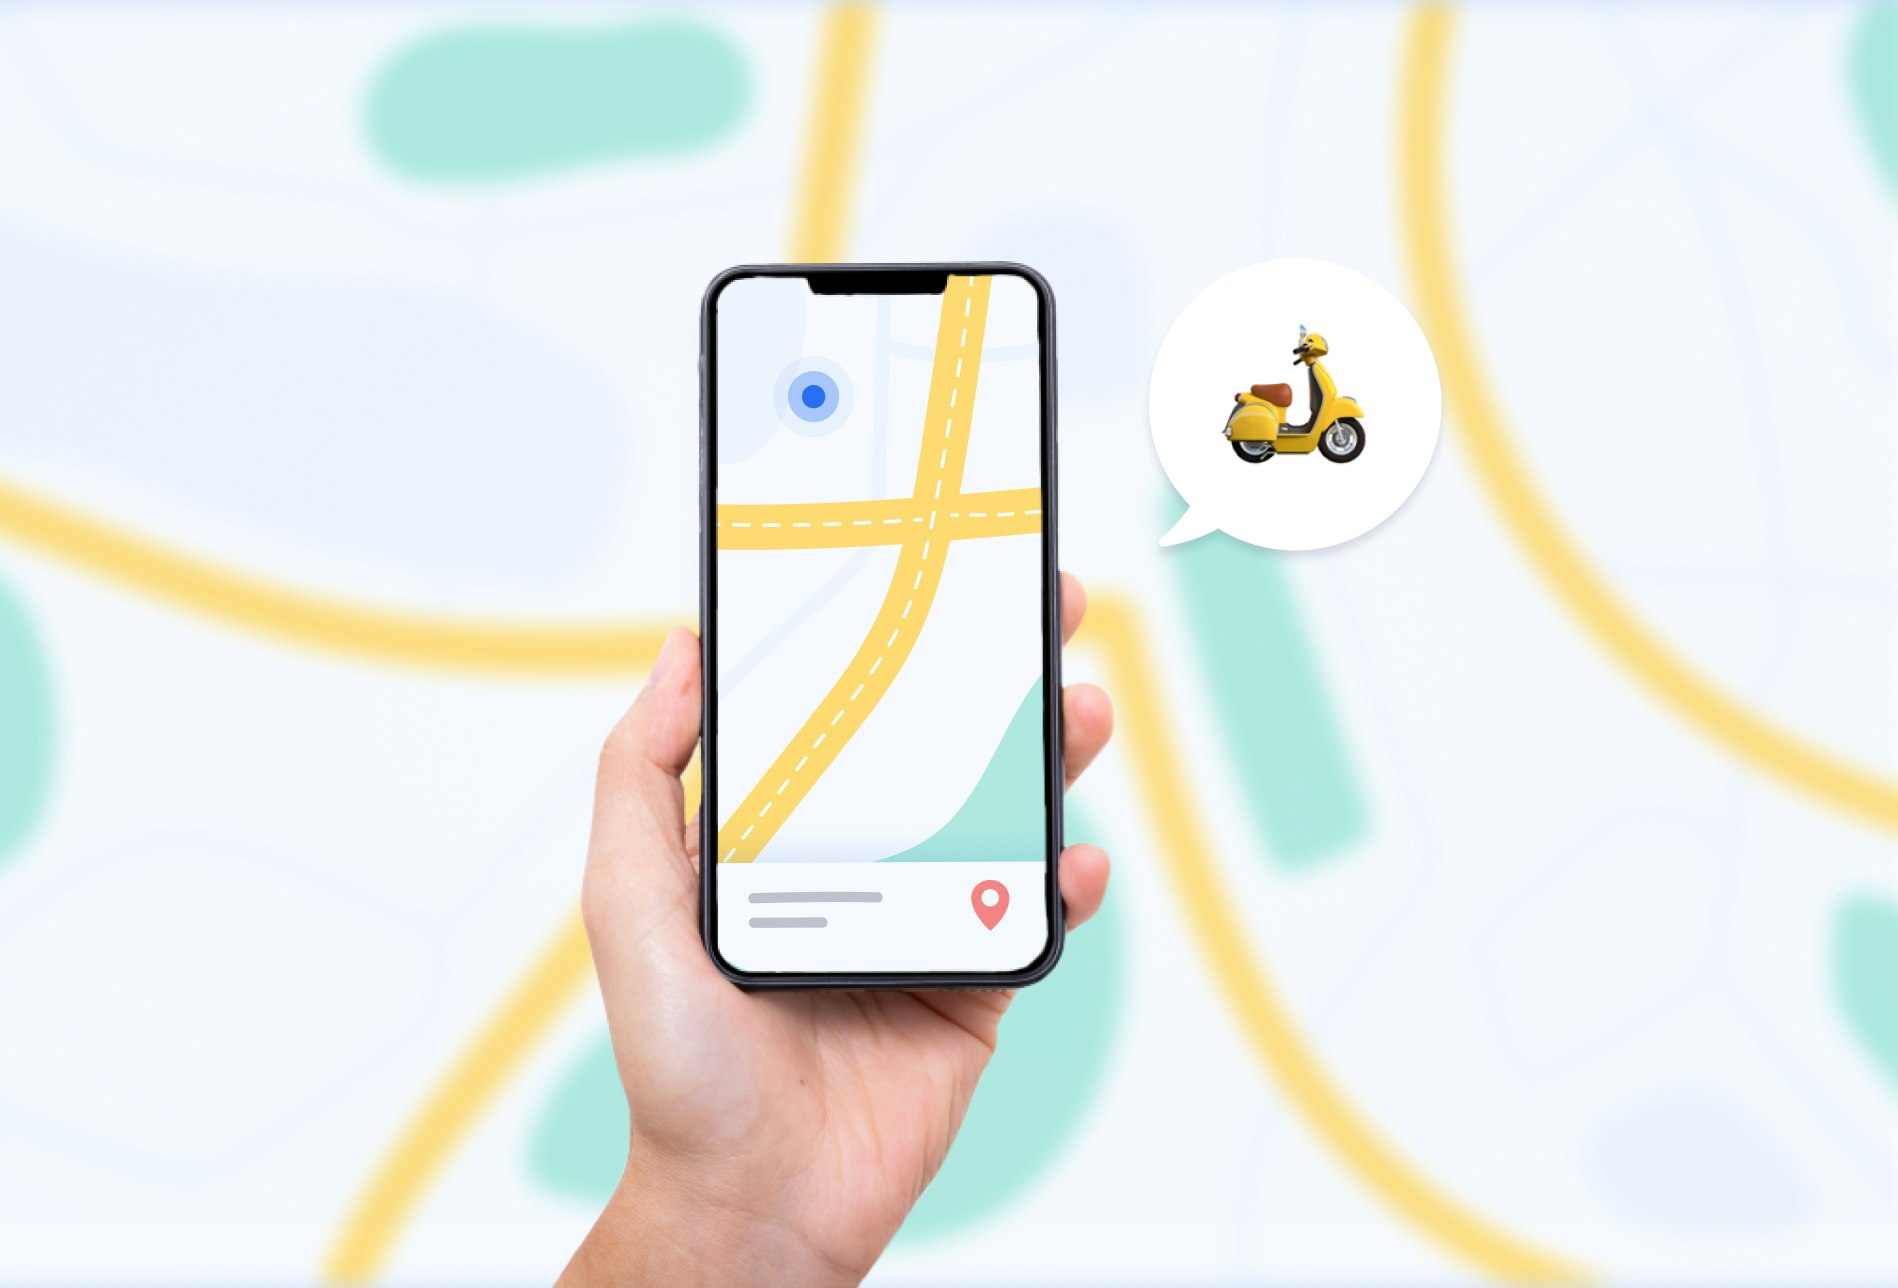 Close-up hand holding an iPhone displaying an example of direct to consumer delivery, including map with a rider on the route.